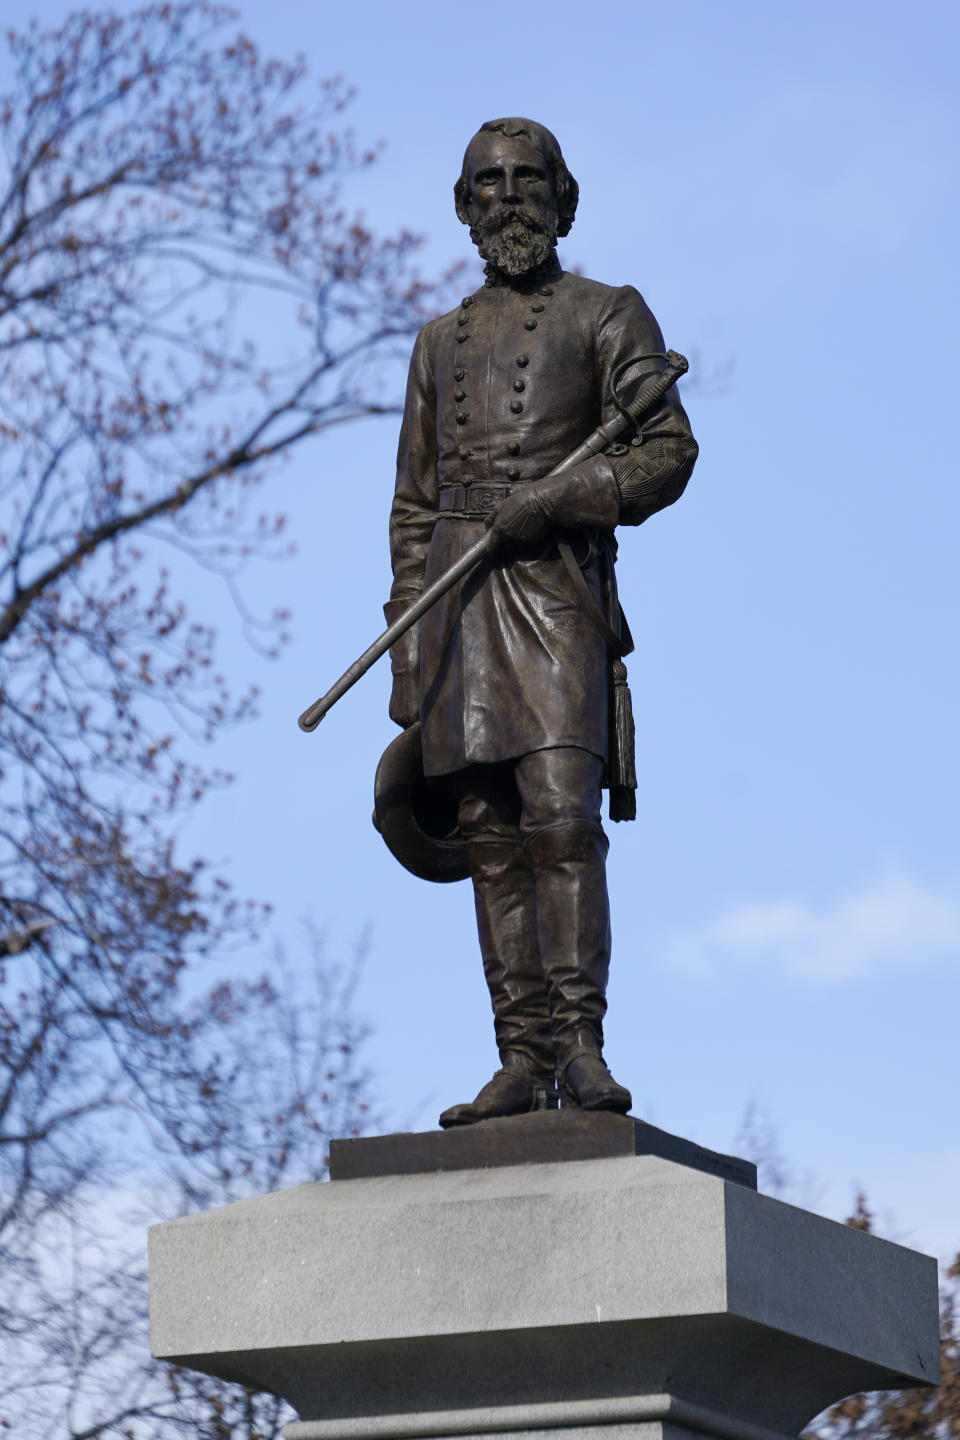 FILE - The monument of confederate General A.P. Hill, which contains his remains, is in the middle of a traffic circle on Arthur Ashe Blvd. Thursday Jan. 6, 2022, in Richmond, Va. Work to relocate Richmond’s final city-owned Confederate monument should start this week after a judge refused a request to delay the removal of the statue of Gen. A.P. Hill from its prominent spot in Virginia's capital, an official said. (AP Photo/Steve Helber, File)